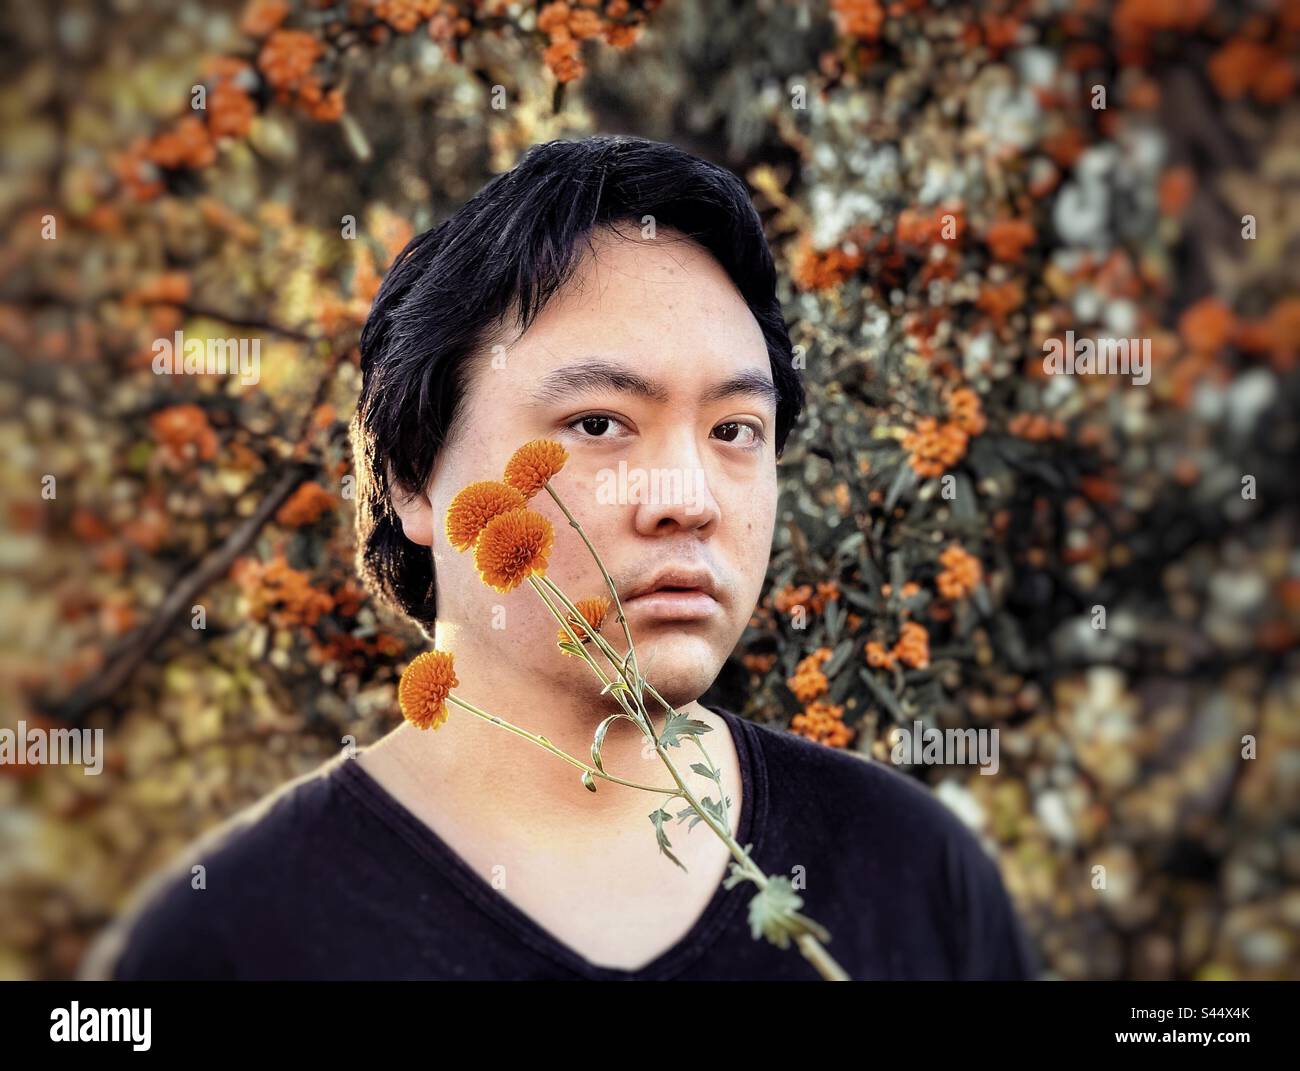 Close-up portrait of young Asian man with orange chrysanthemum flowers against orange Cotoneaster berry trees. Focus on foreground. Autumn themes. Stock Photo